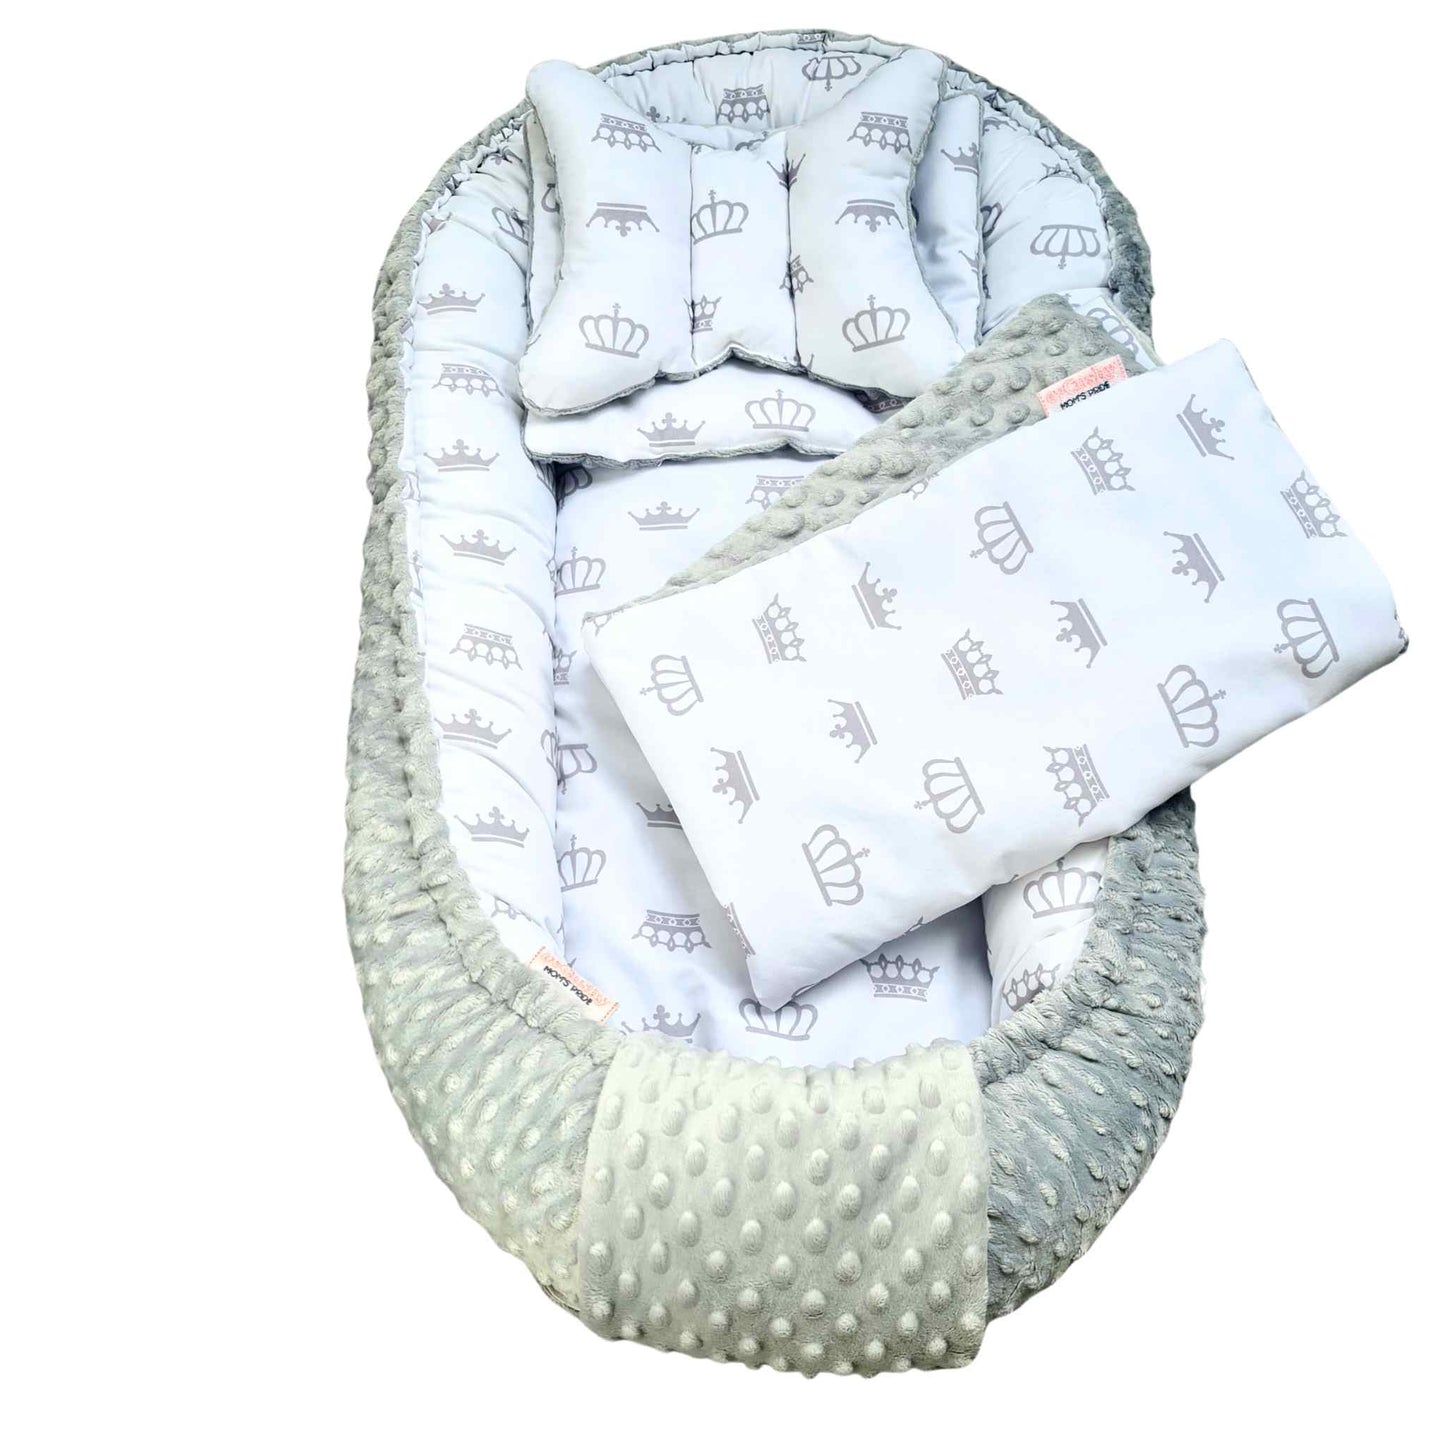 baby nest sleep pod cosy lounger grey bottom white with grey crowns pattern with liner and pillow plus blanket evcushy